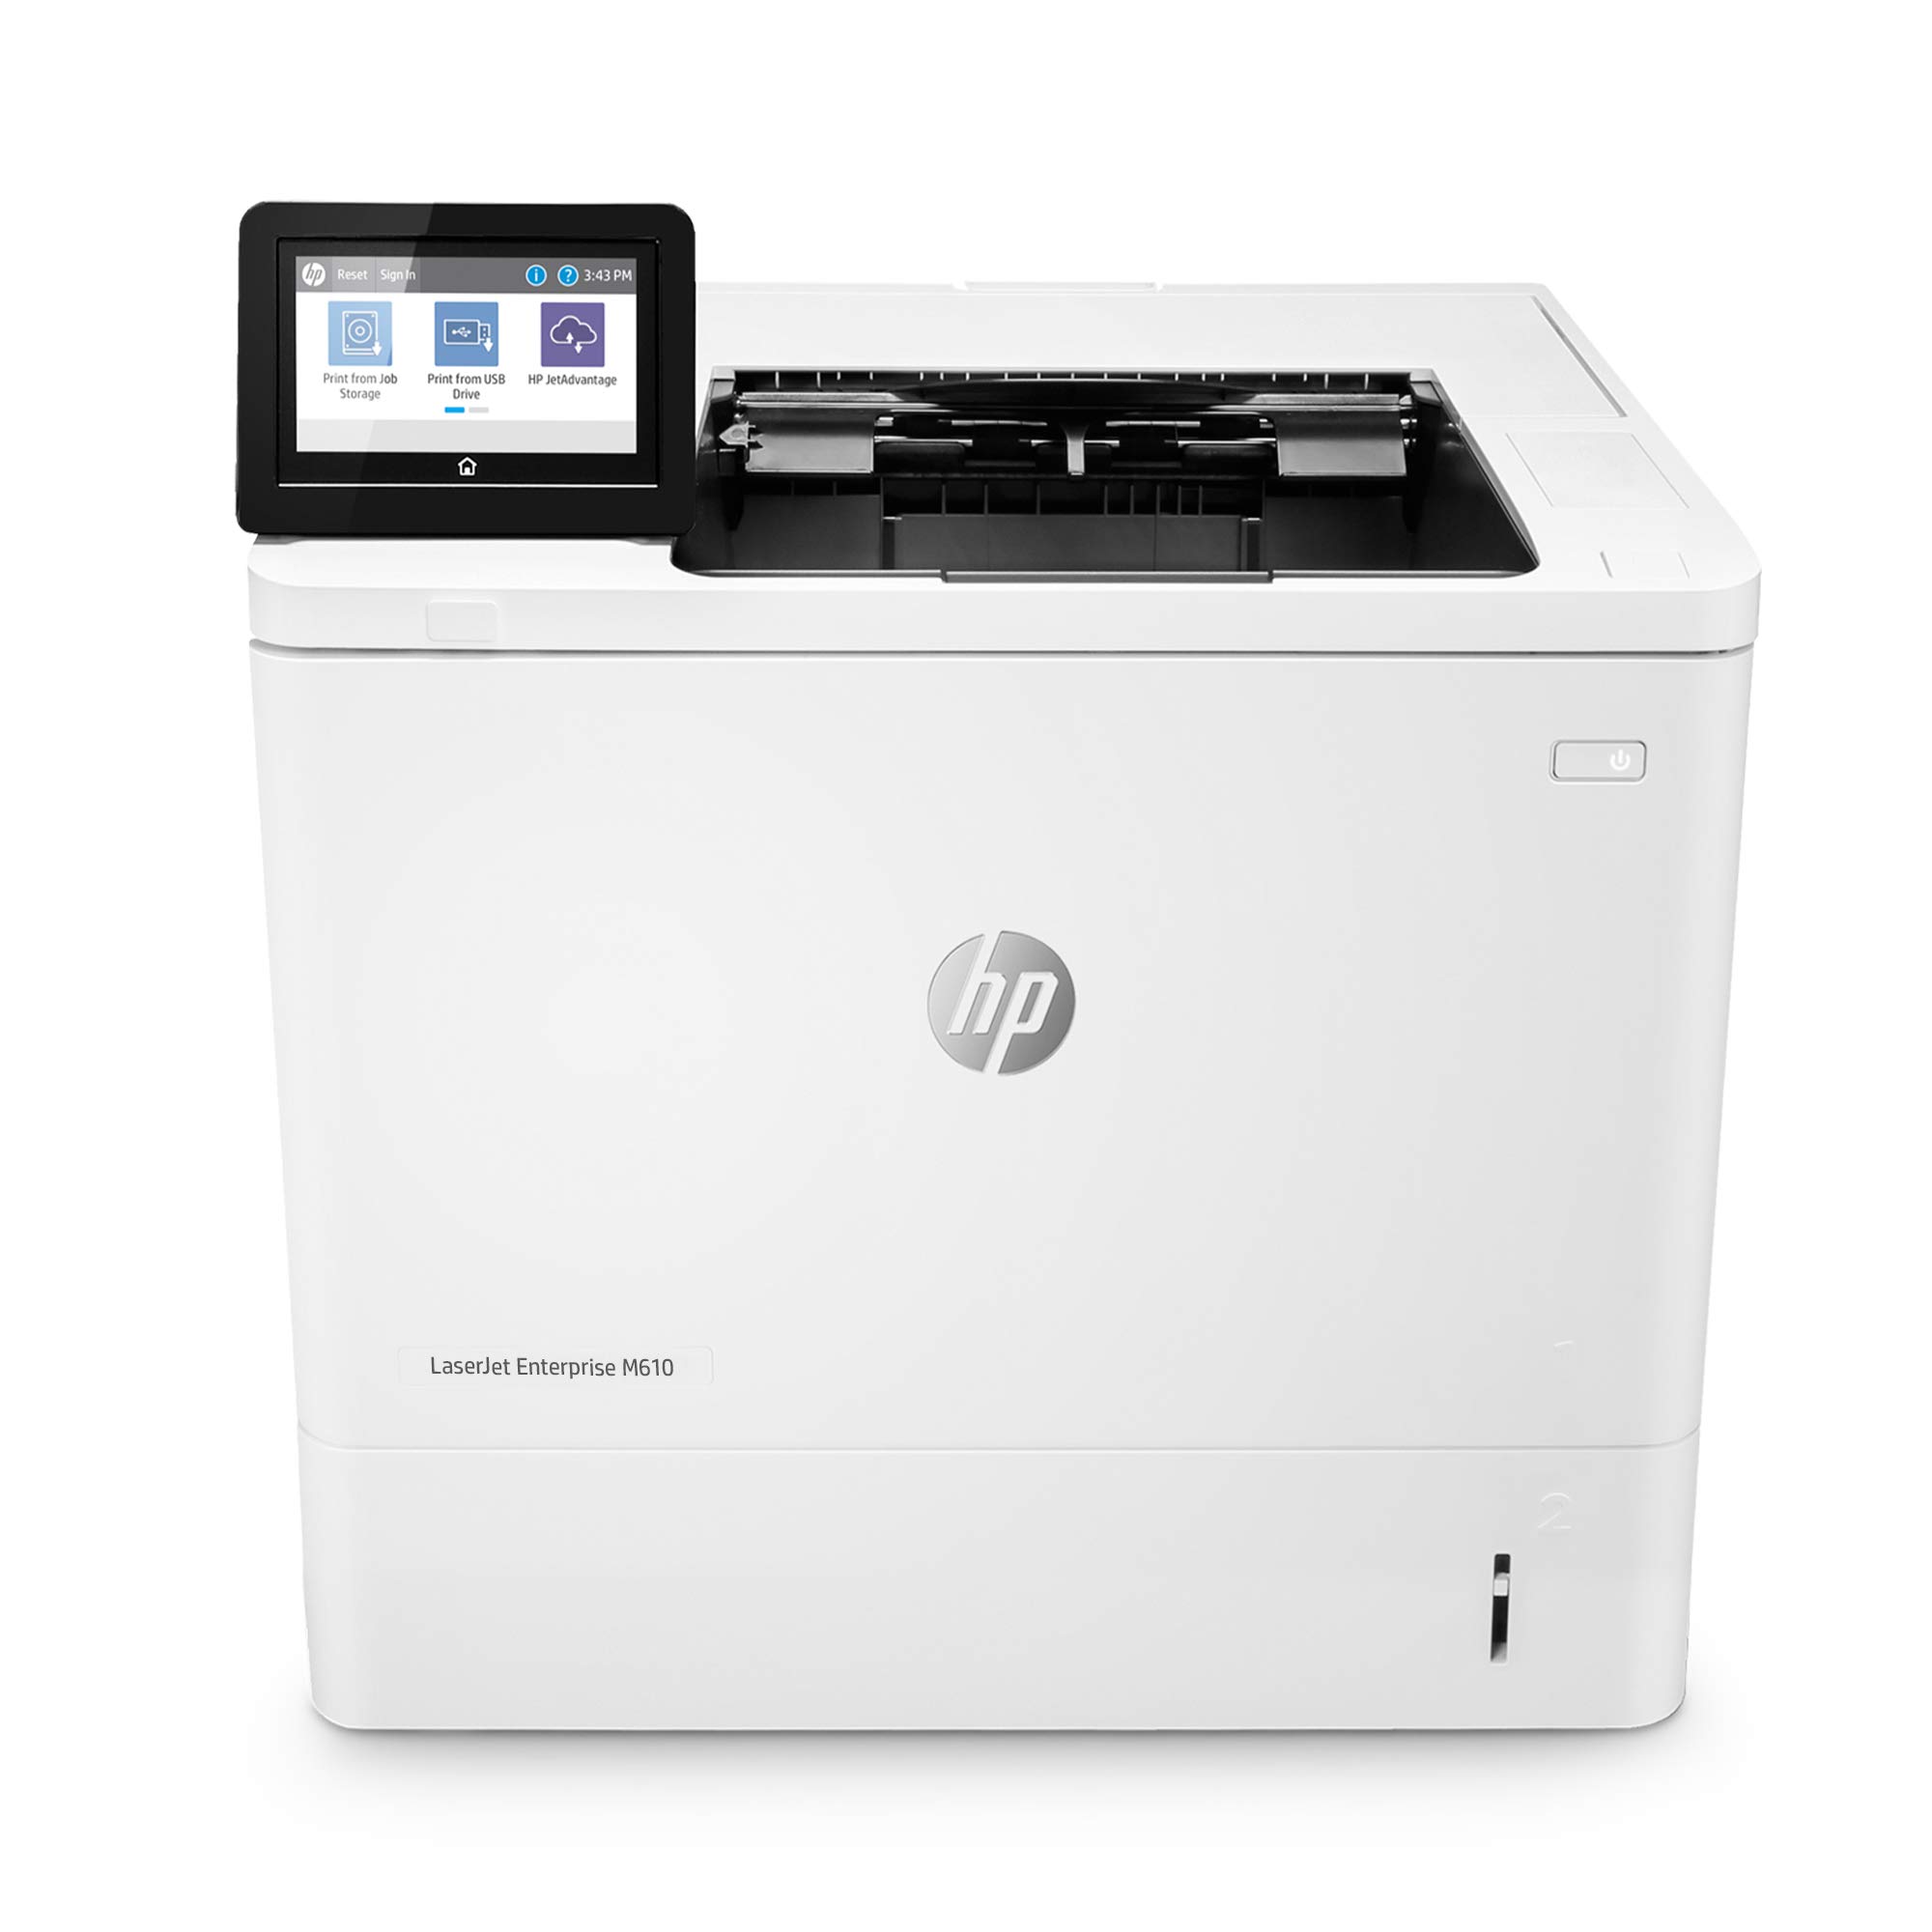 HP LaserJet Enterprise M610dn Monochrome Printer with built-in Ethernet & 2-sided printing (7PS82A), White